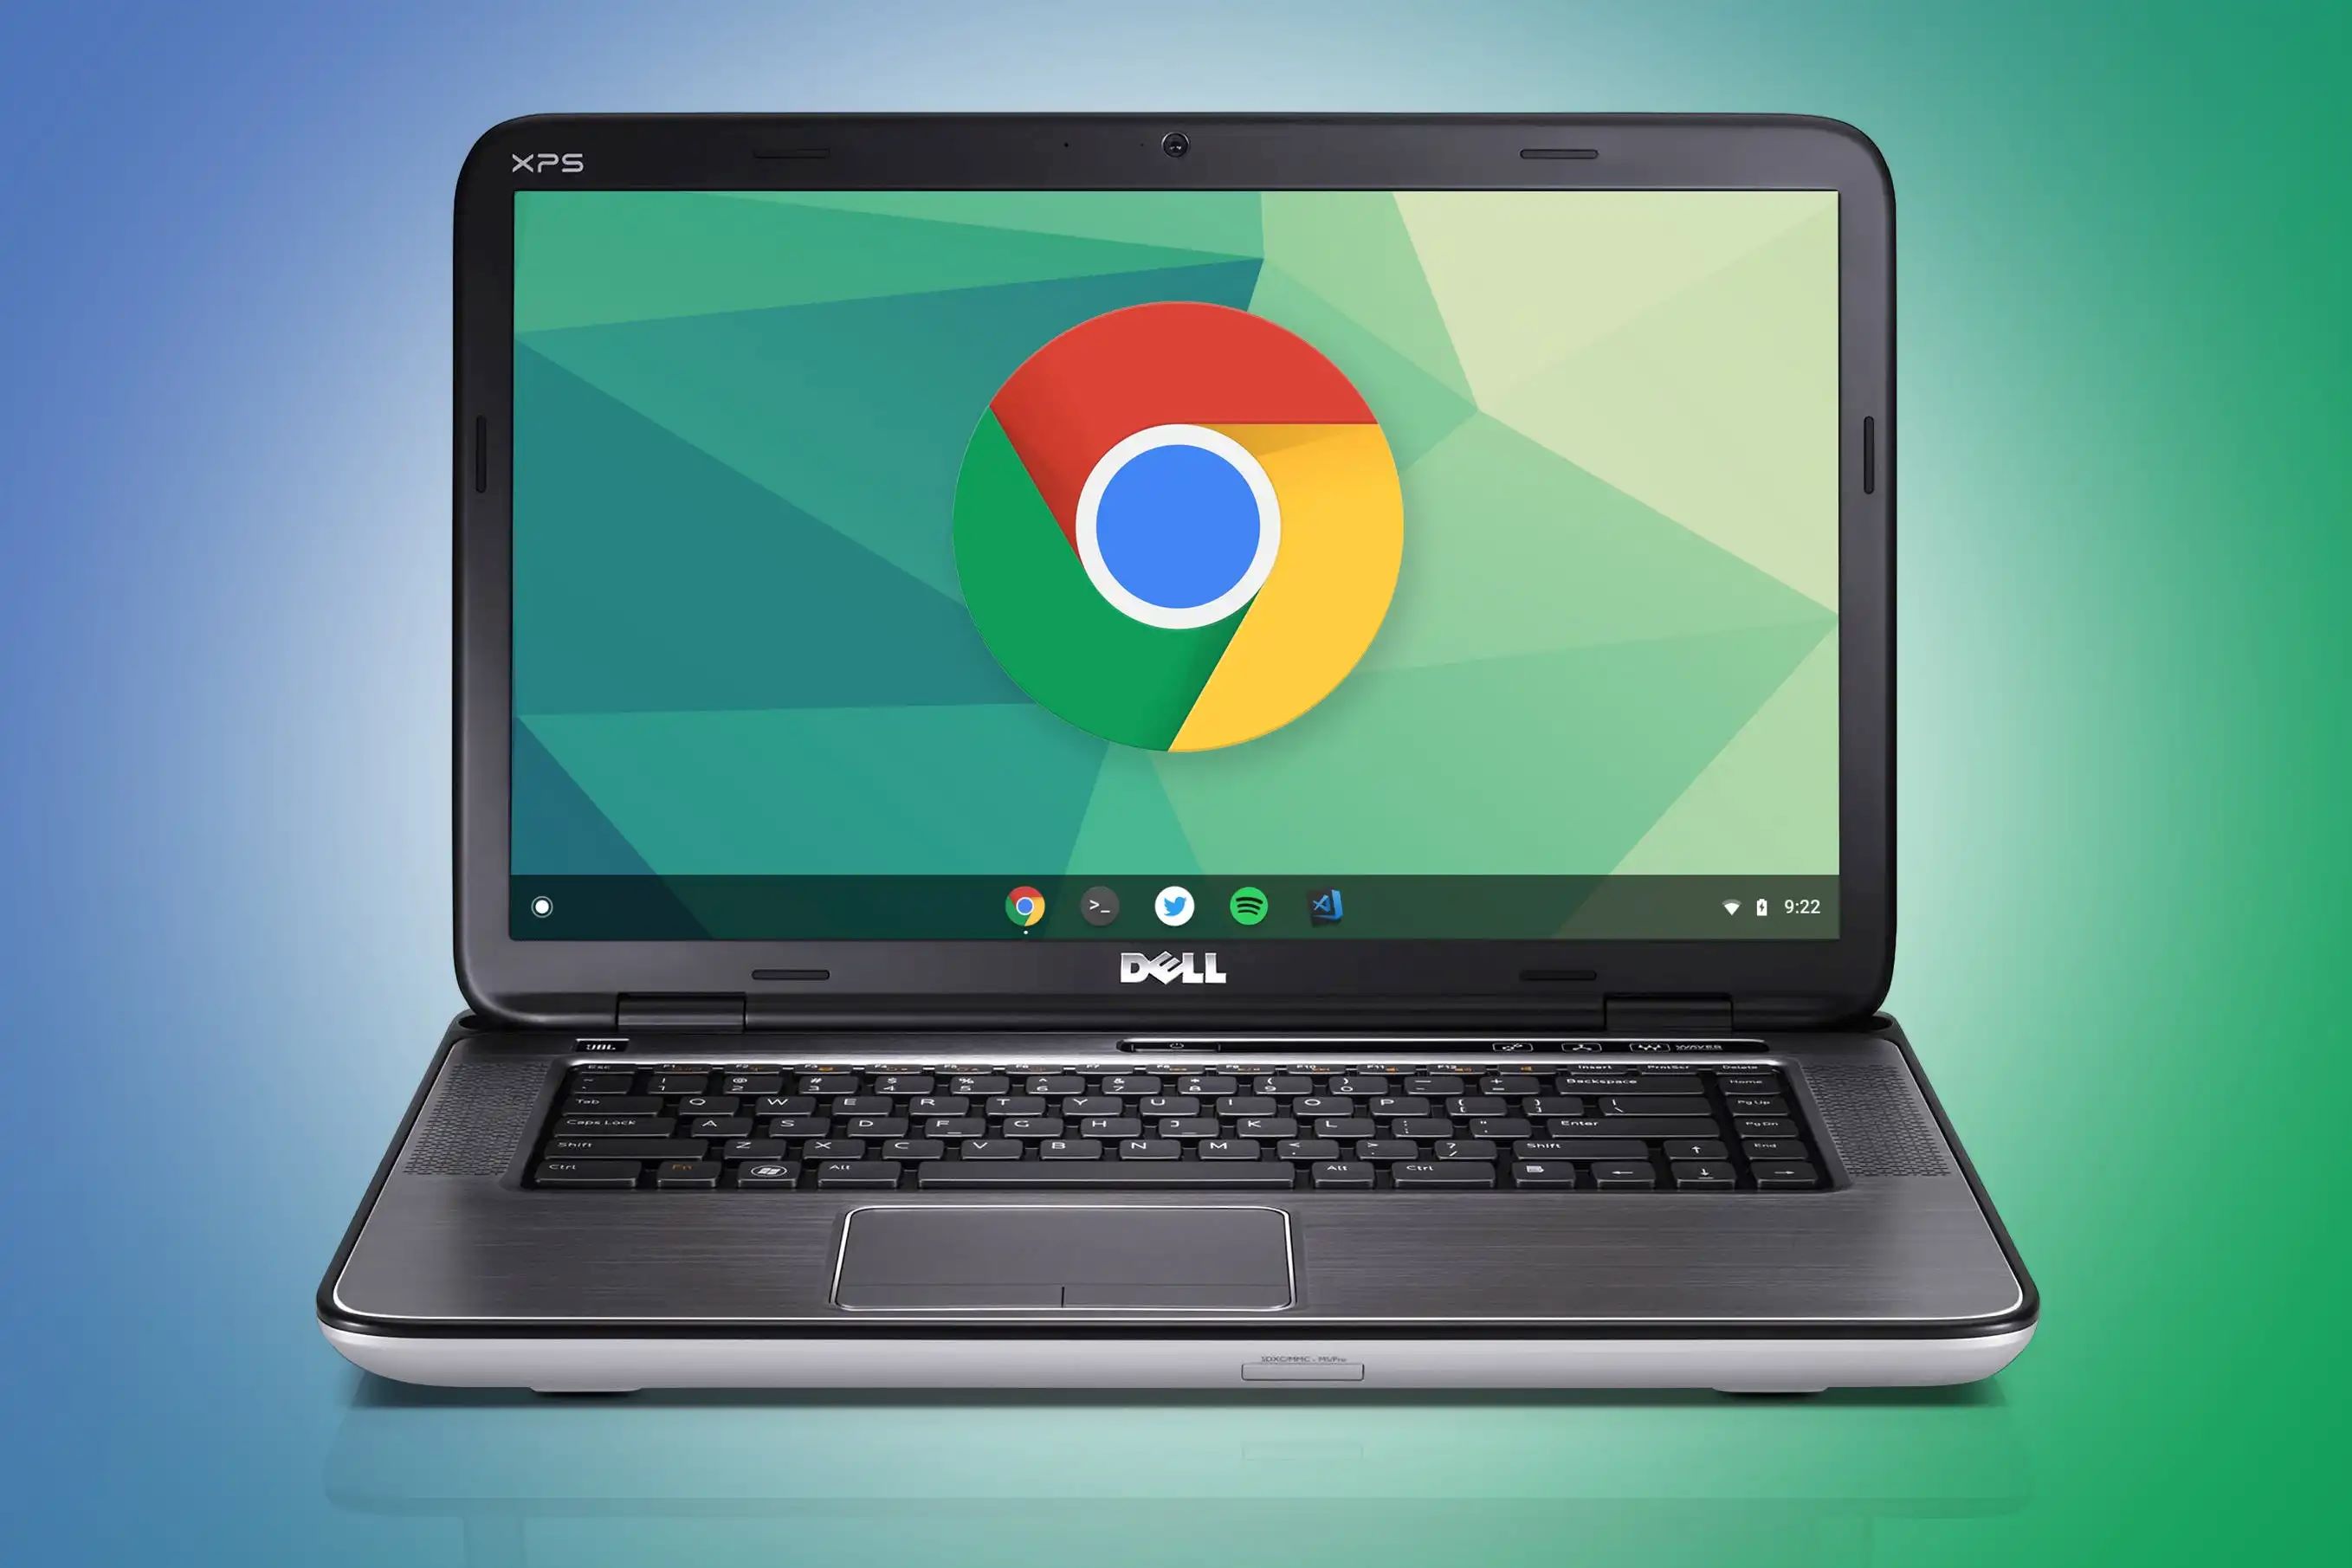 How To Update Chrome Browser On Chromebook